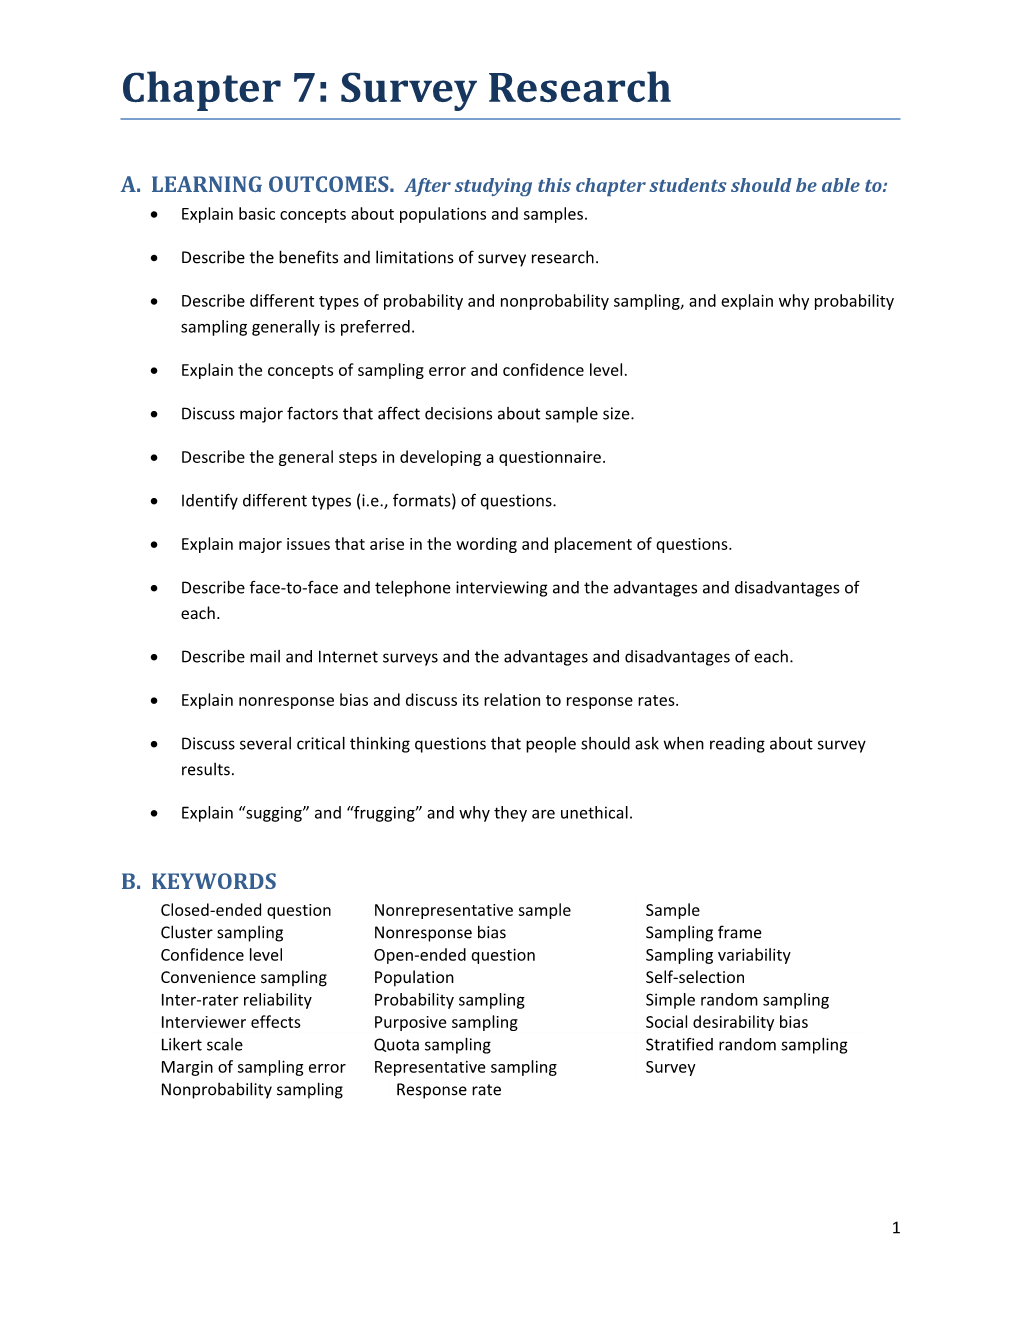 A. LEARNING OUTCOMES. After Studying This Chapter Students Should Be Able To